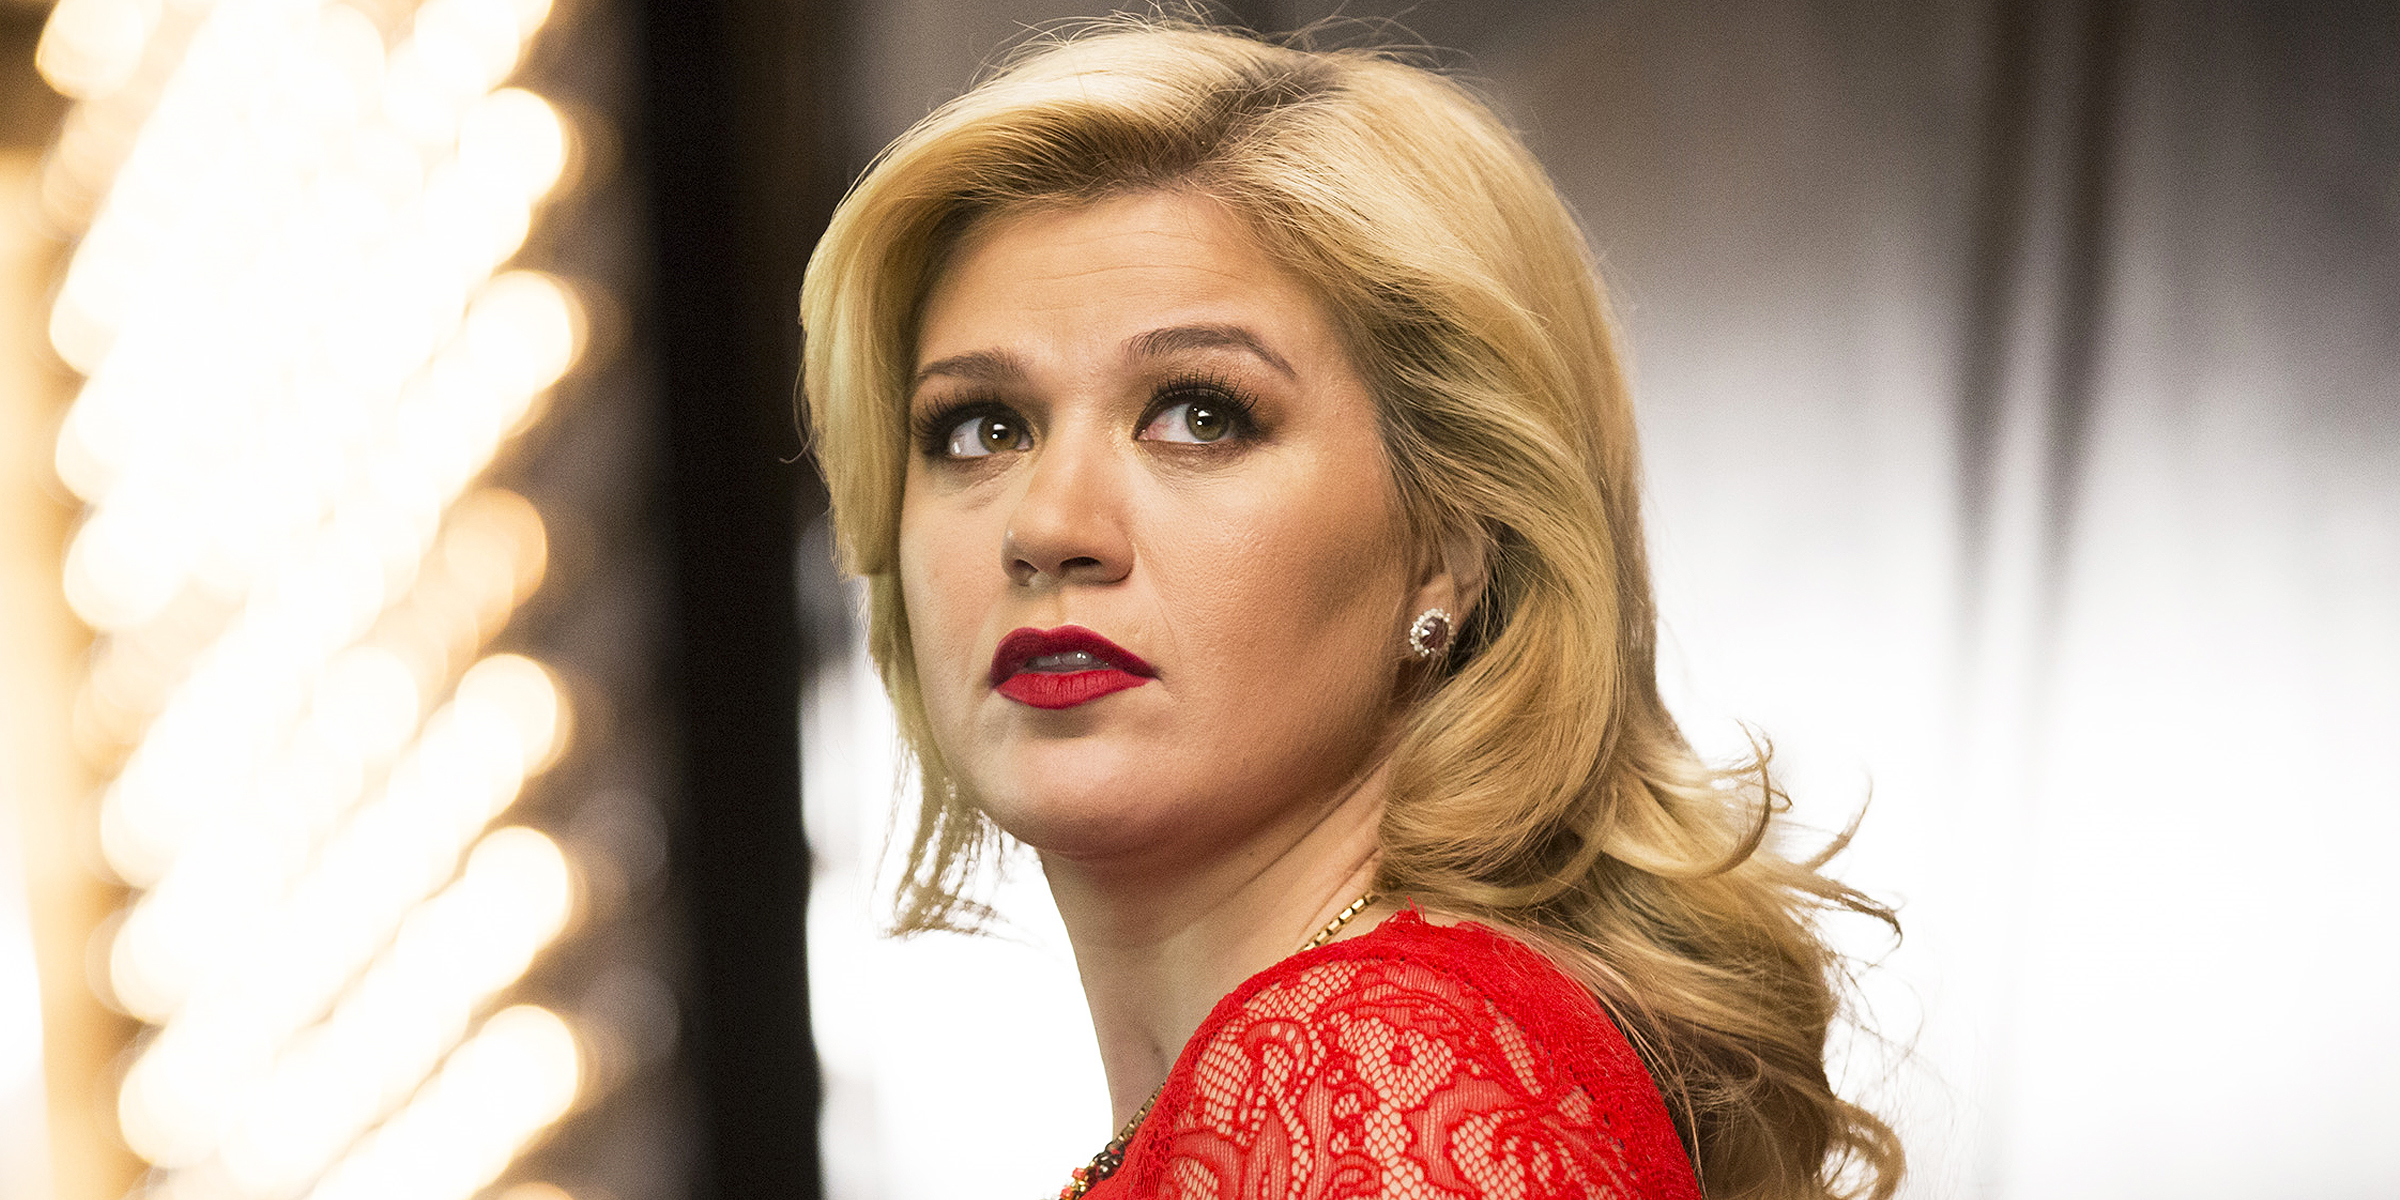 Kelly Clarkson, 2013 | Source: Getty Images